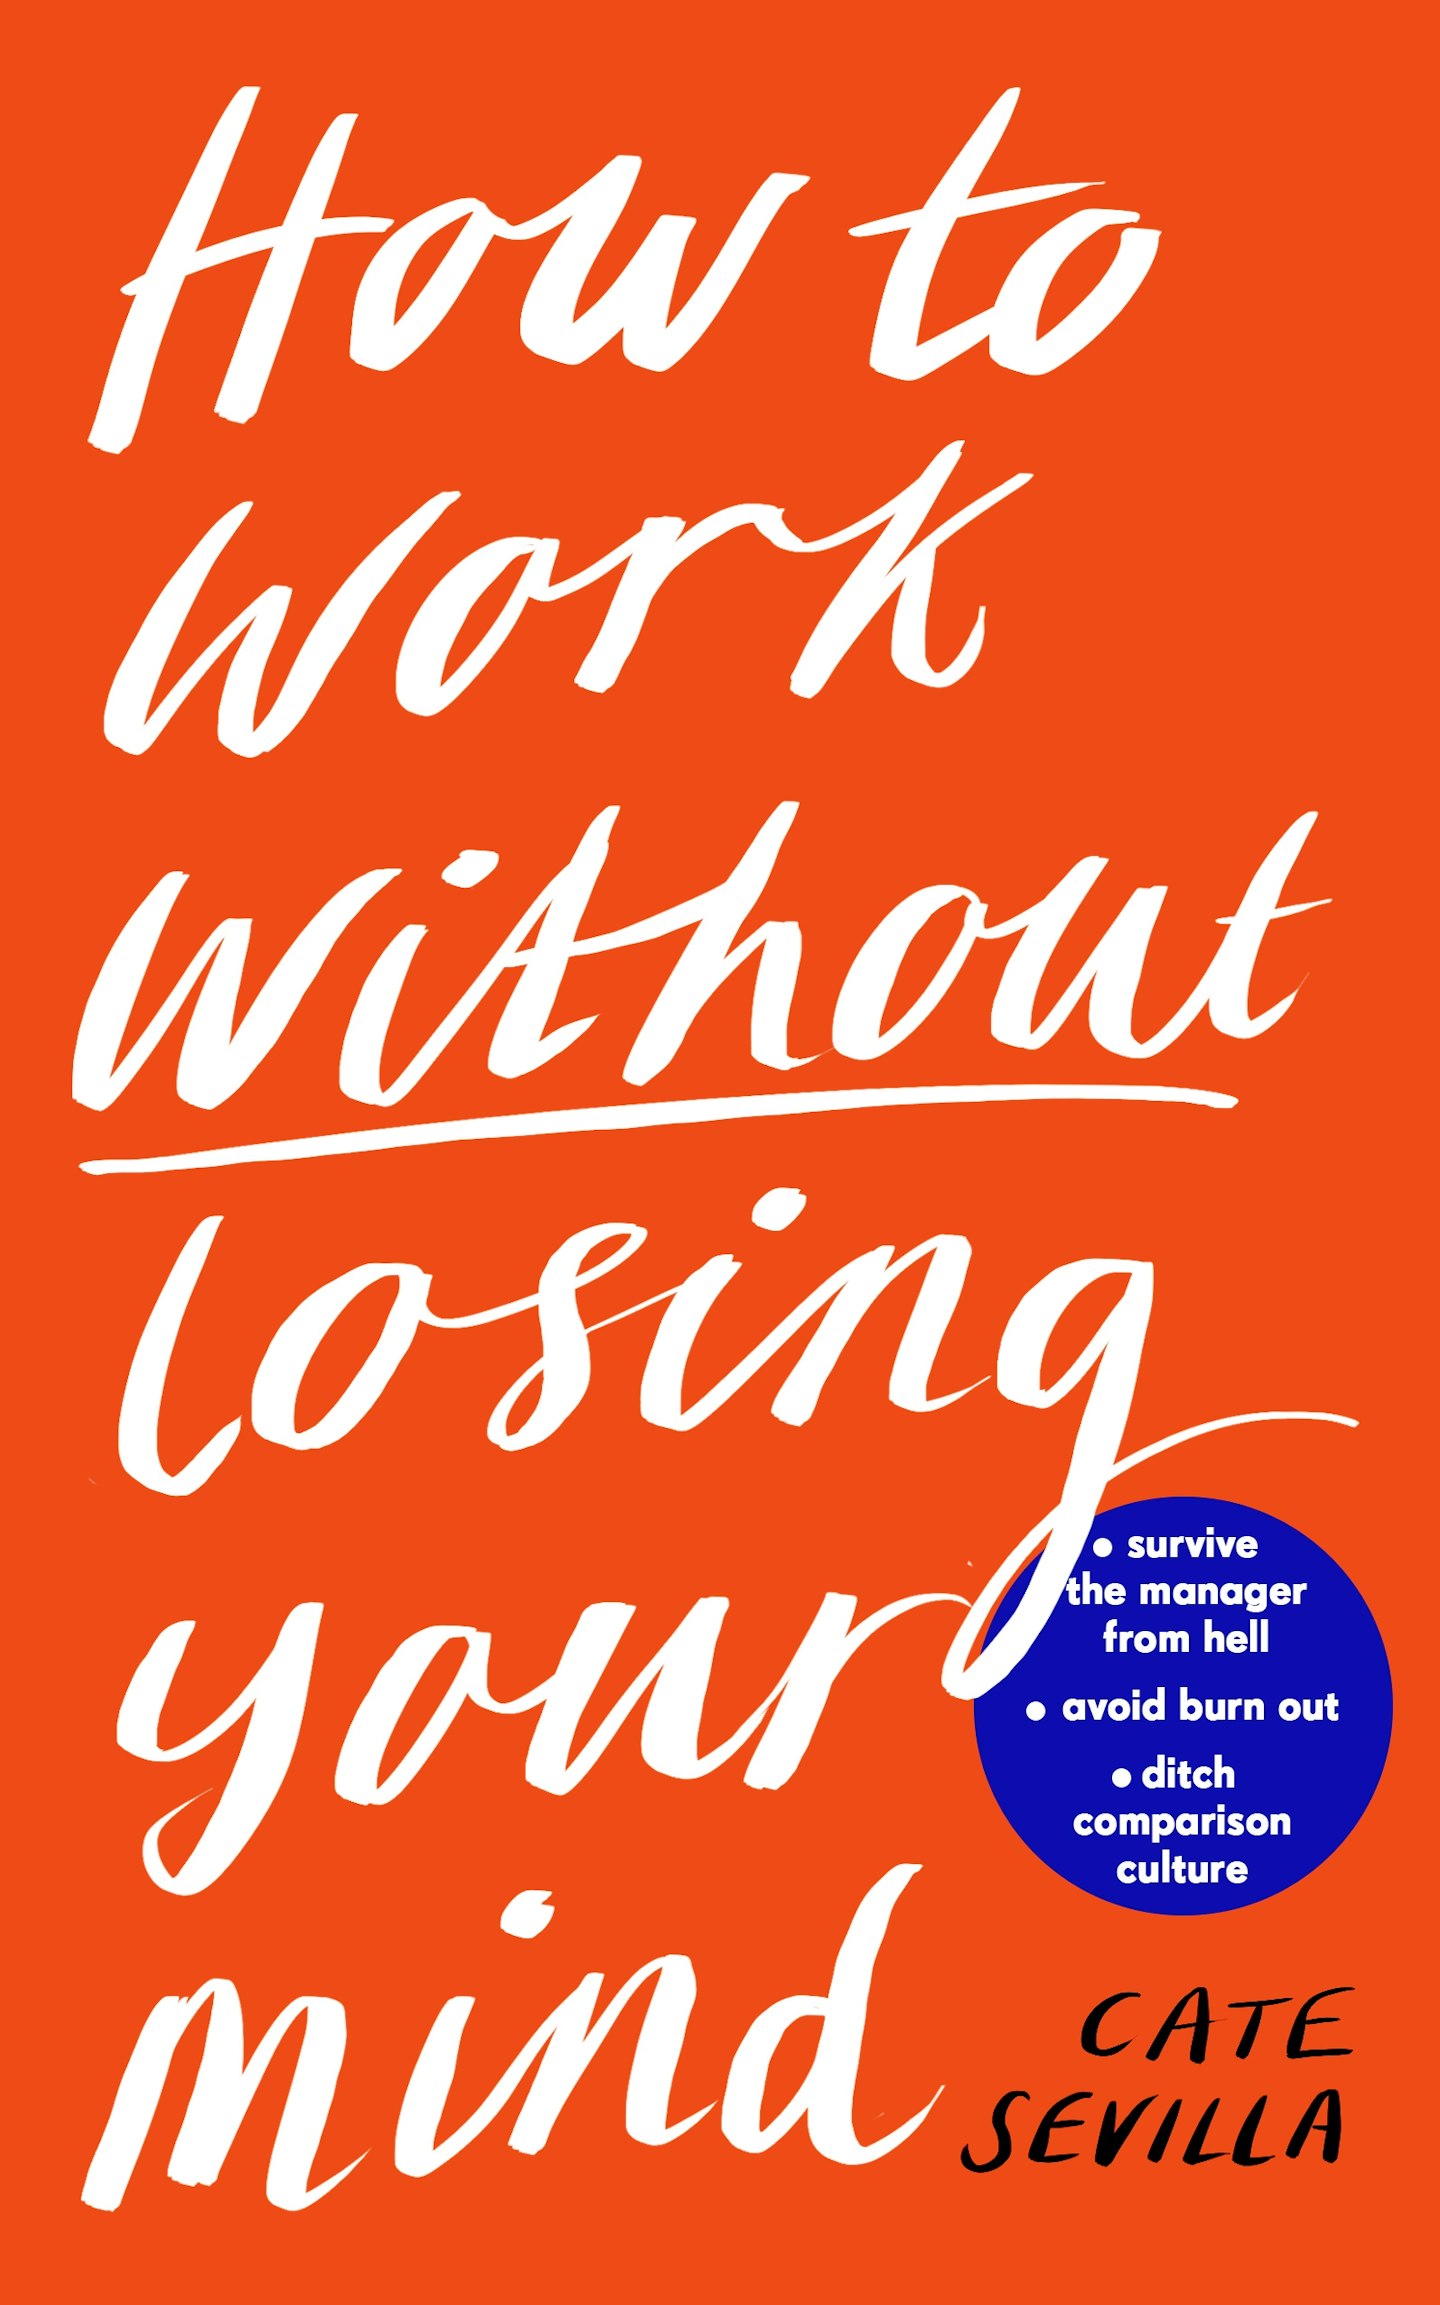 best self help books Cate Sevilla - How to Work Without Losing Your Mind: A Realistic Guide to the Hell of Modern Work, by Cate Sevilla